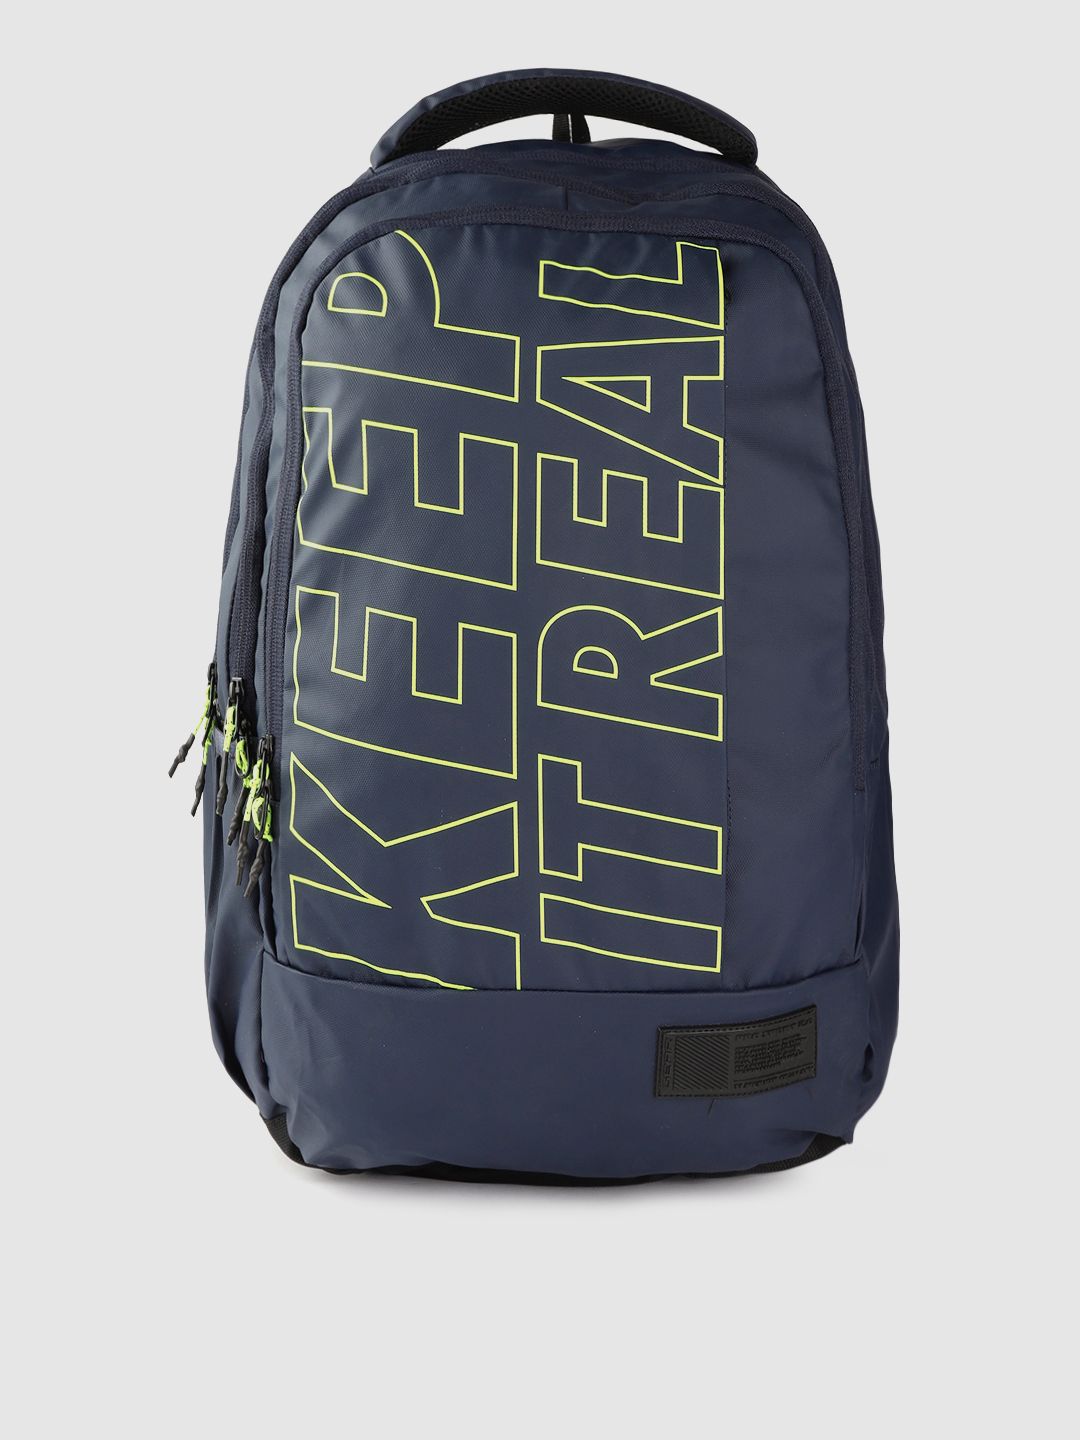 Gear Unisex Blue & Fluorescent Green Typography Print 18 Inch Laptop Backpack Price in India